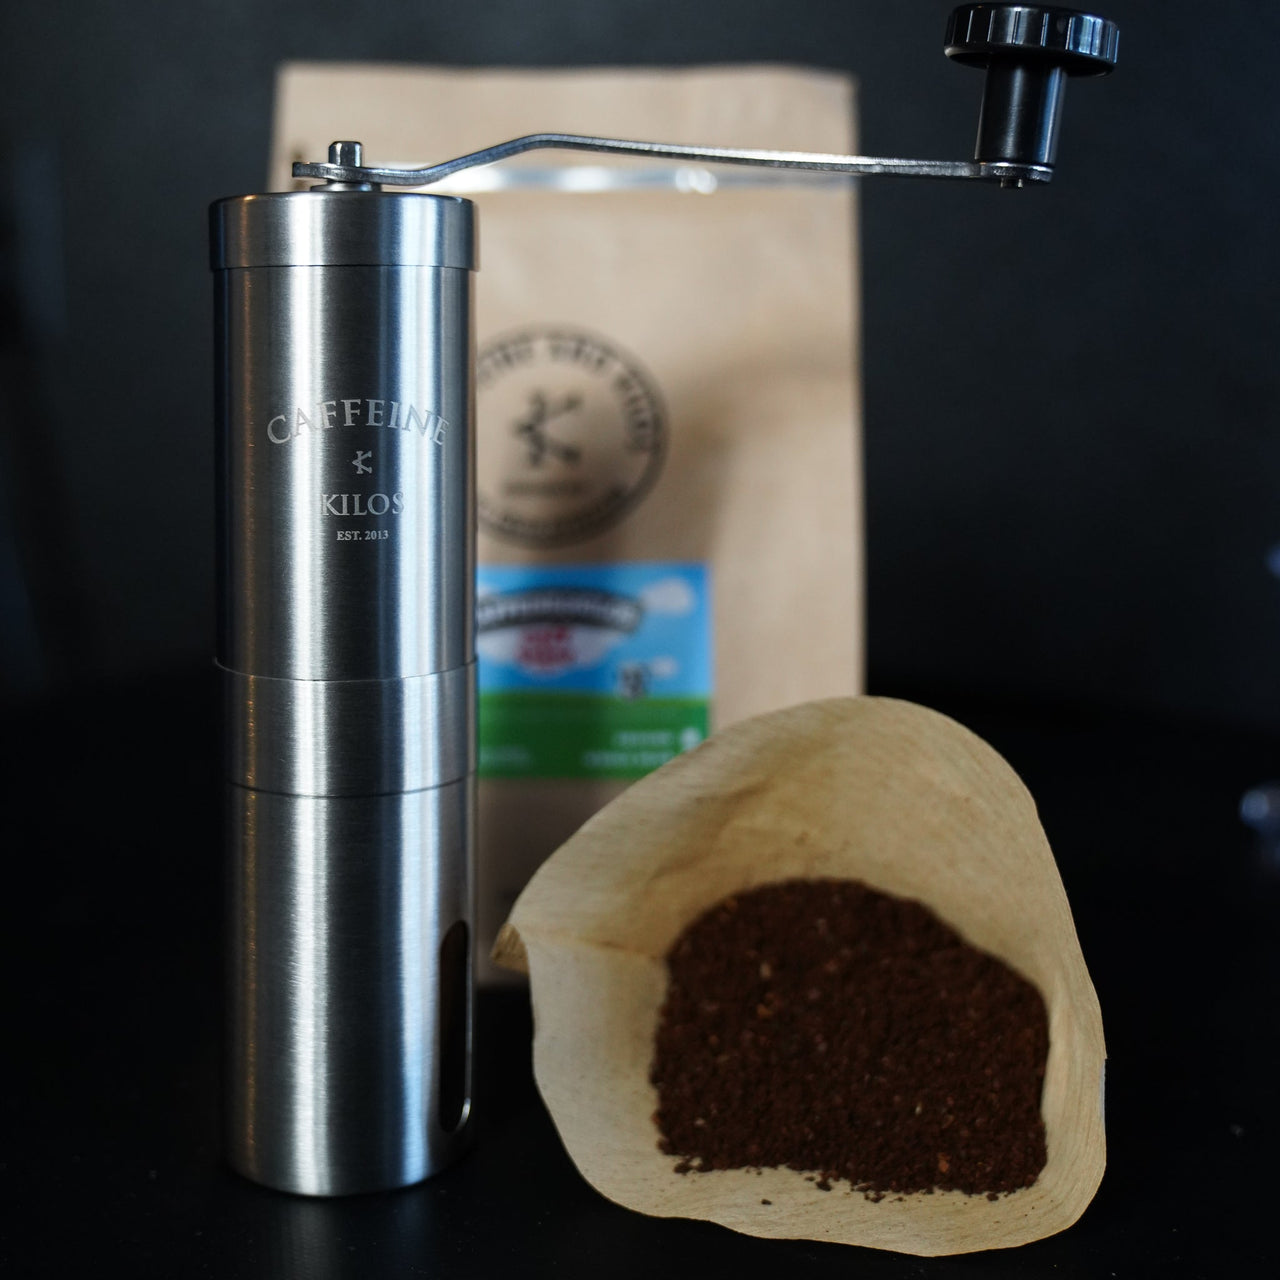 Caffeine and Kilos Inc Accessories Stainless Steel Coffee Grinder